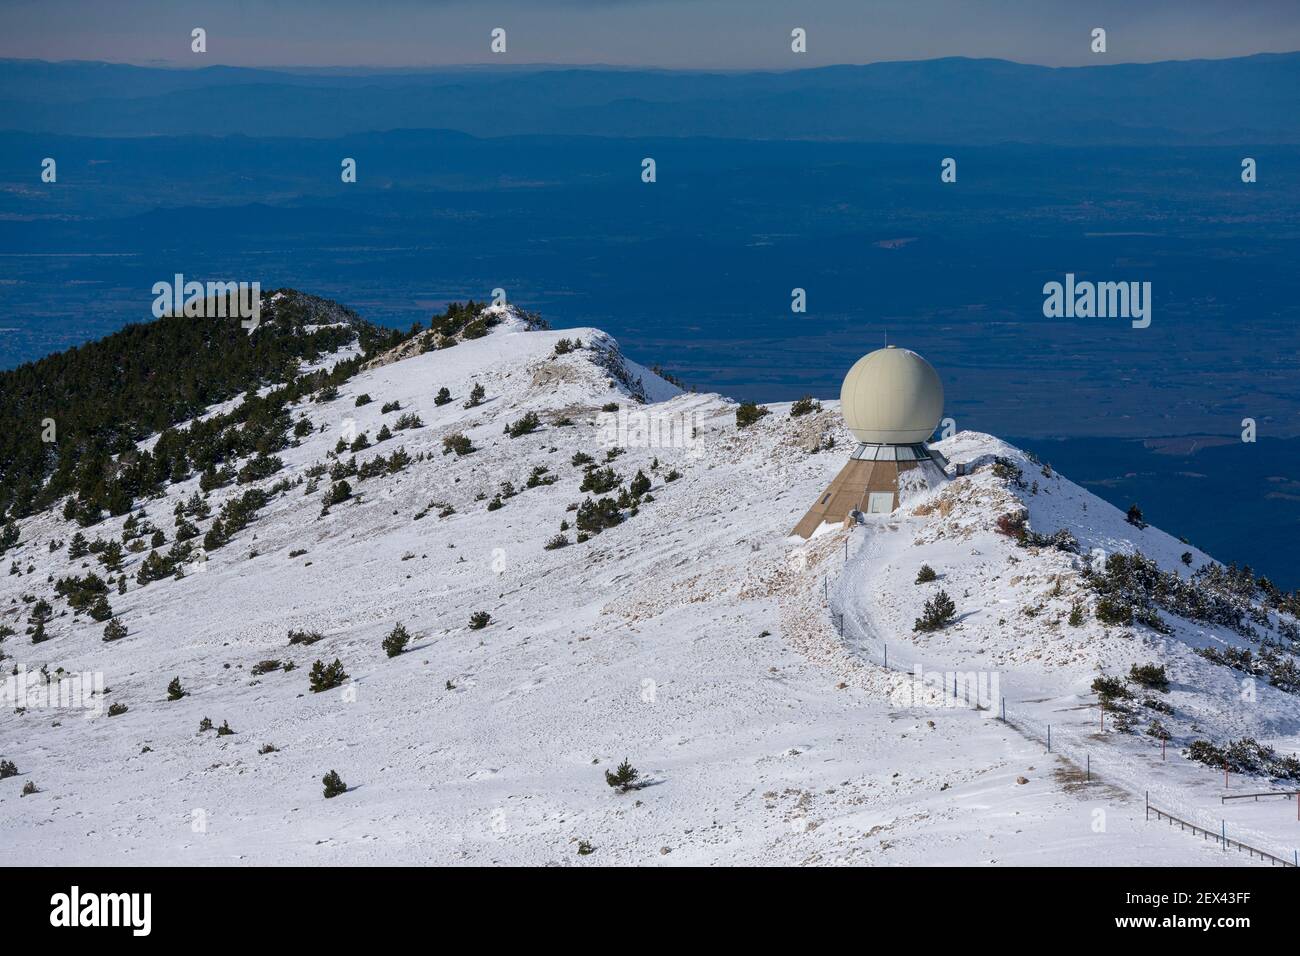 The Radome in the limestone scree on the northern slope of the summit of Mont Ventoux in snow, Vaucluse 84, Provence-Alpes-Cote d'Azur, France Stock Photo